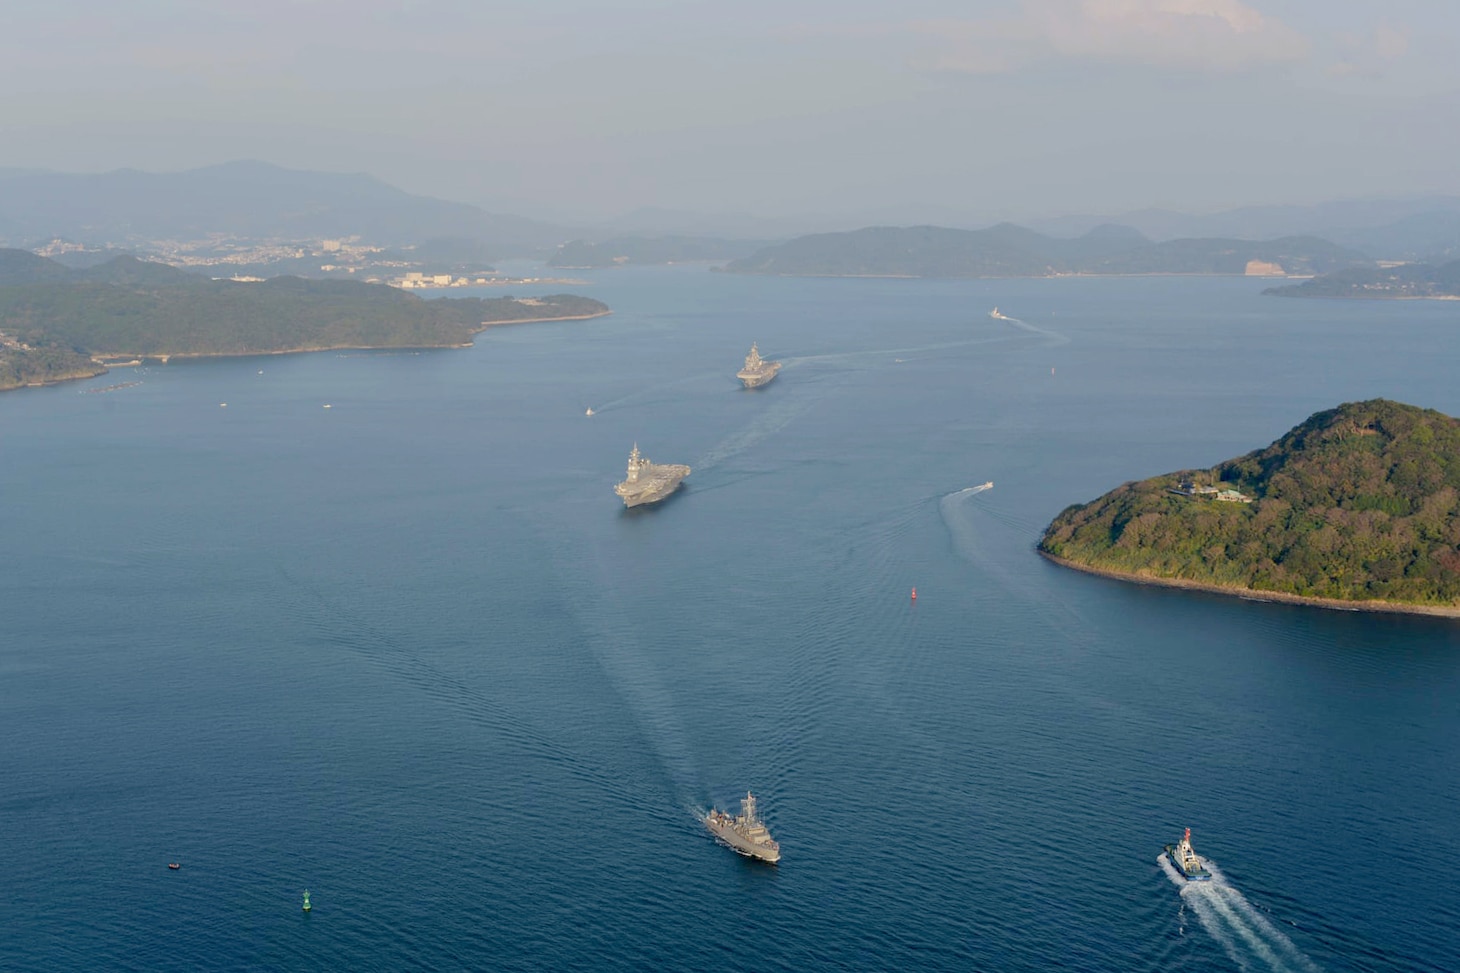 SASEBO, Japan (Nov. 3, 2021) Japan Maritime Self-Defense Force (JMSDF) helicopter destroyer JS Ise (DDH 182) and the U.S. Navy's forward-deployed amphibious assault ship USS America (LHA 6), center, sail together departing Sasebo for integrated training with locally-based JMSDF ships. (JMSDF photo)